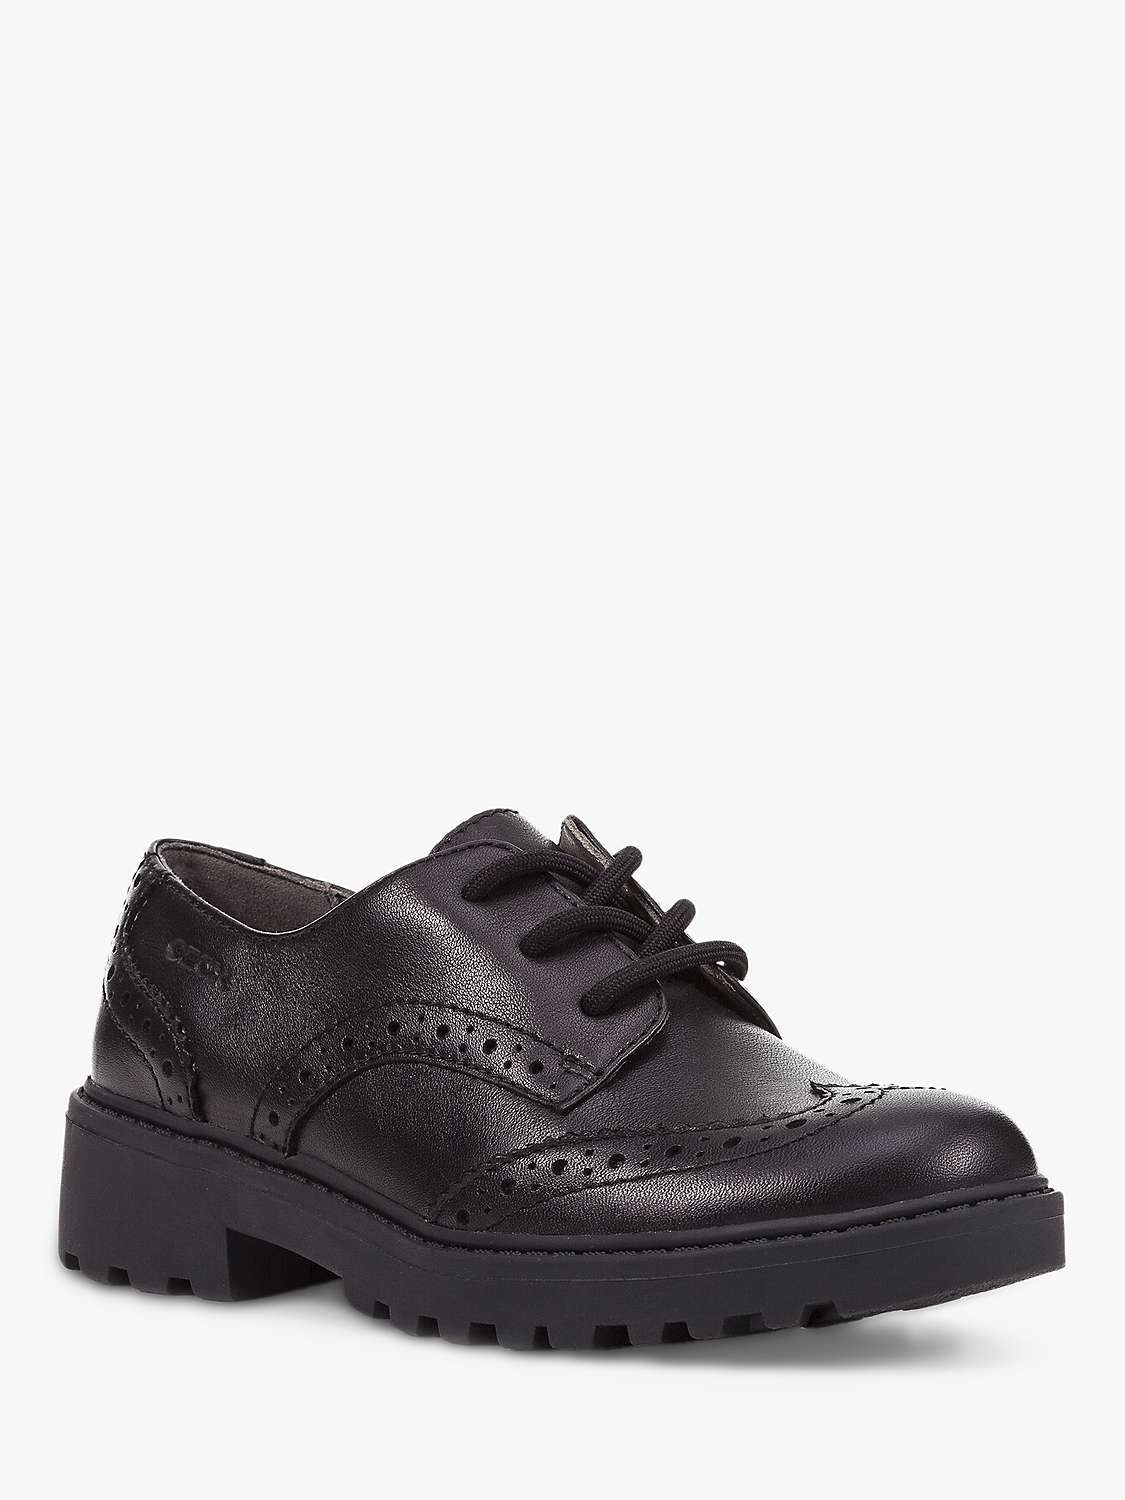 Buy Geox Children's Casey Lace Up Brogue School Shoes Online at johnlewis.com